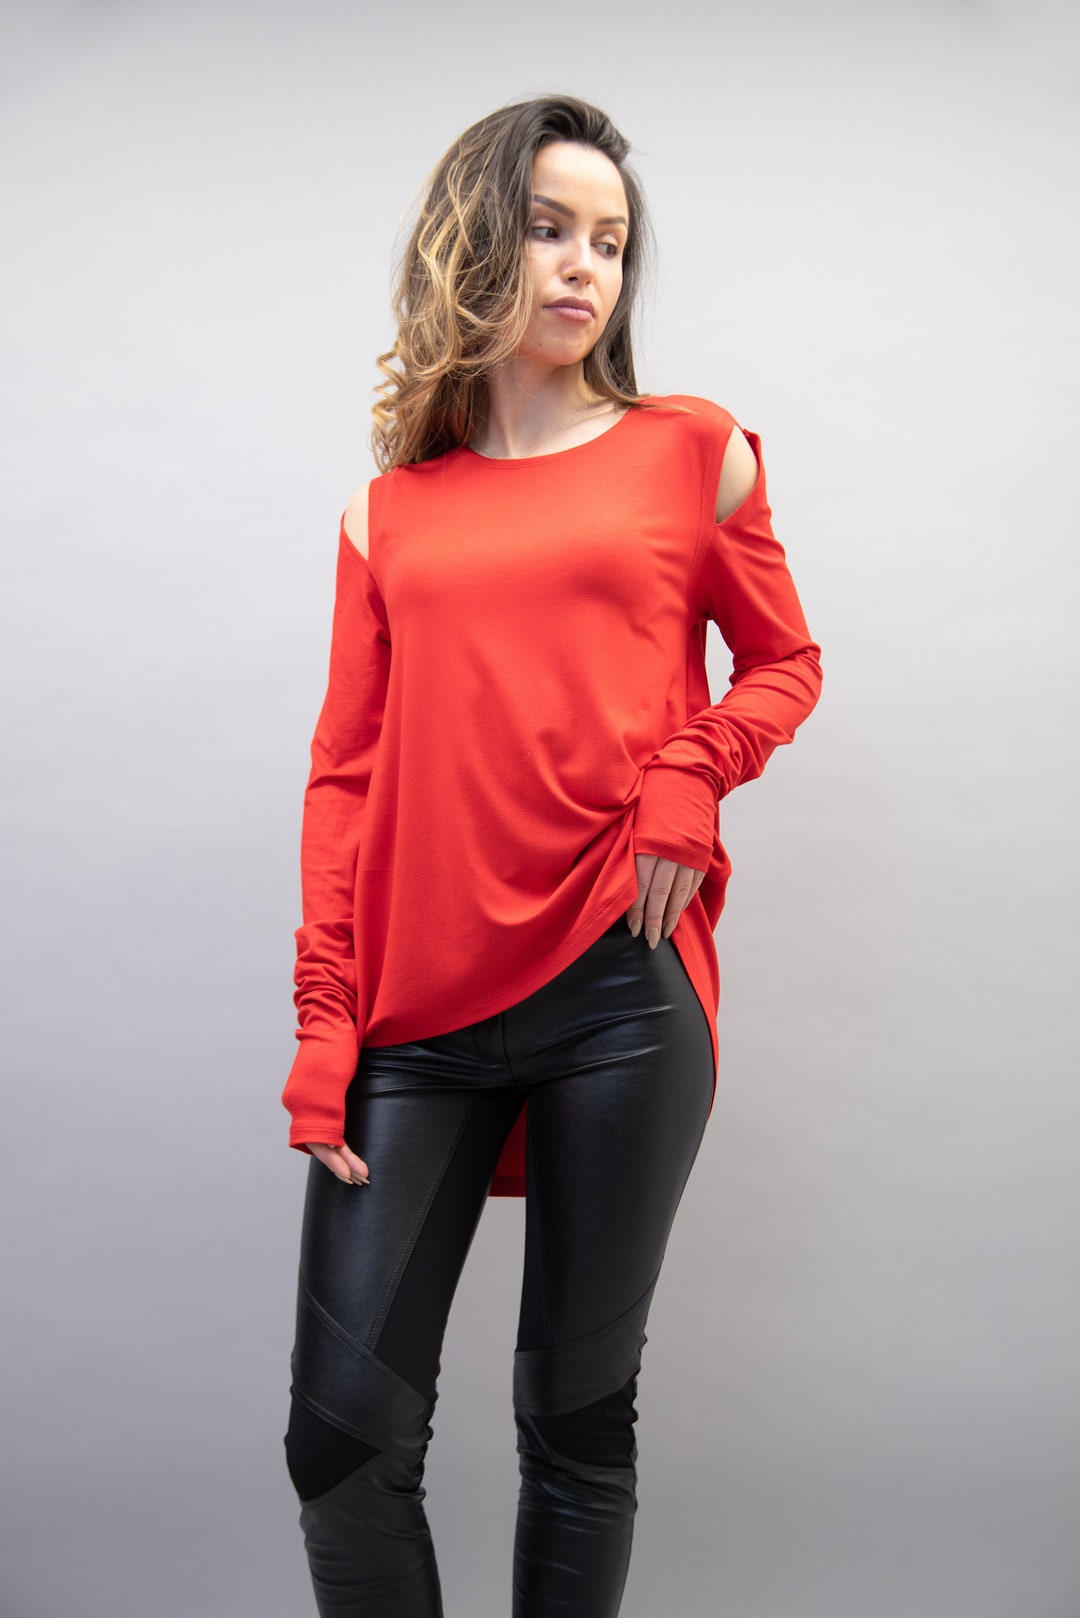 Open Shoulders Red Tunic/ Thumb Holes Shirt/ Casual Top/ Loose - Etsy